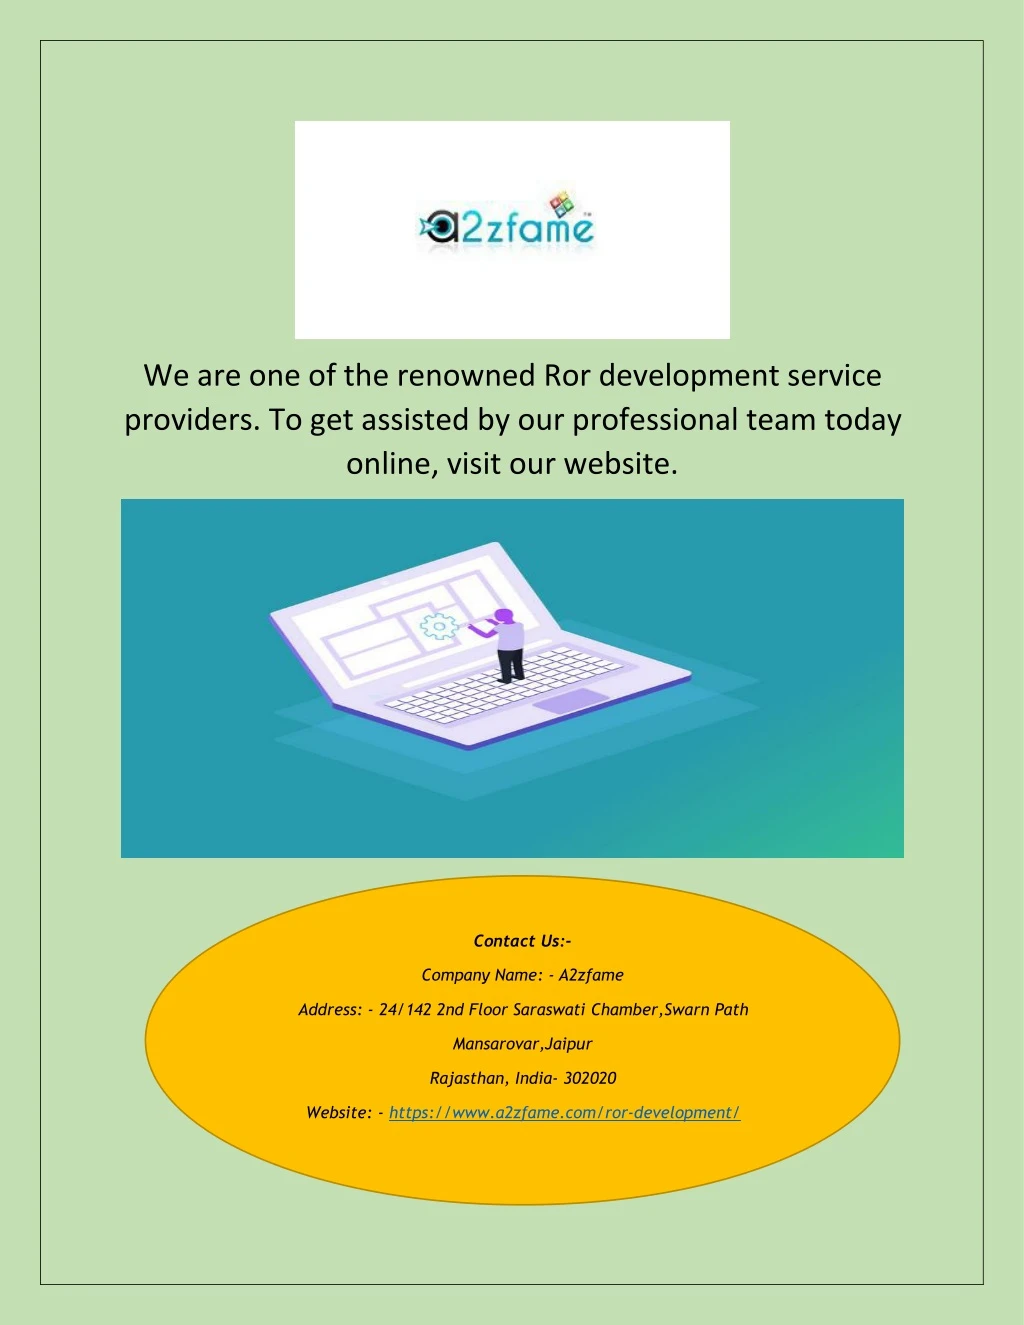 we are one of the renowned ror development